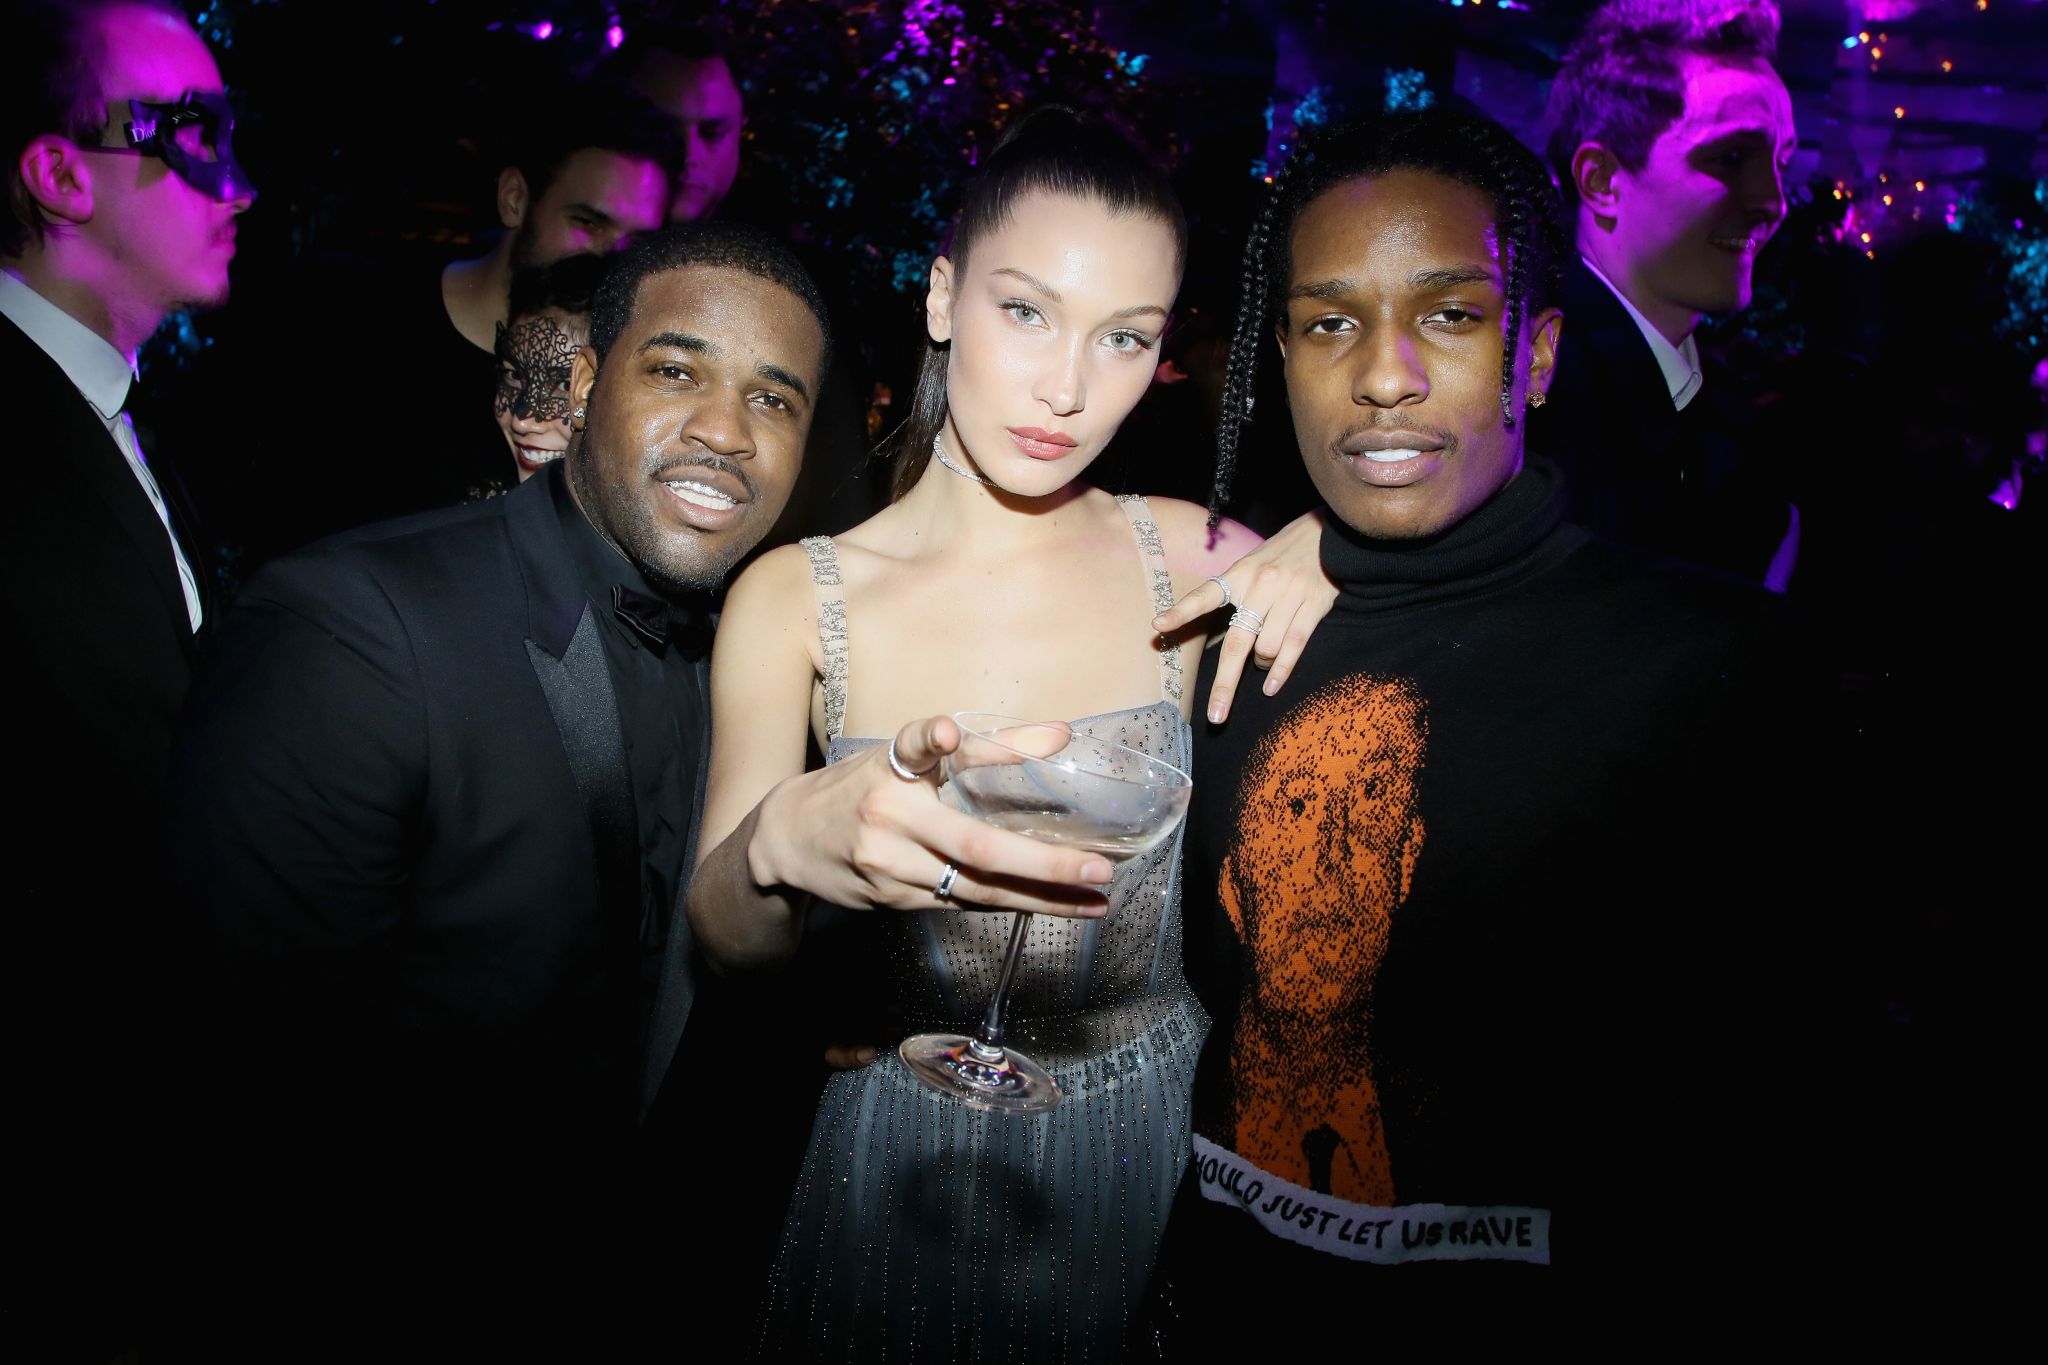 Kendall Jenner, Bella Hadid, A$AP Rocky, and More at Balmain's After Party